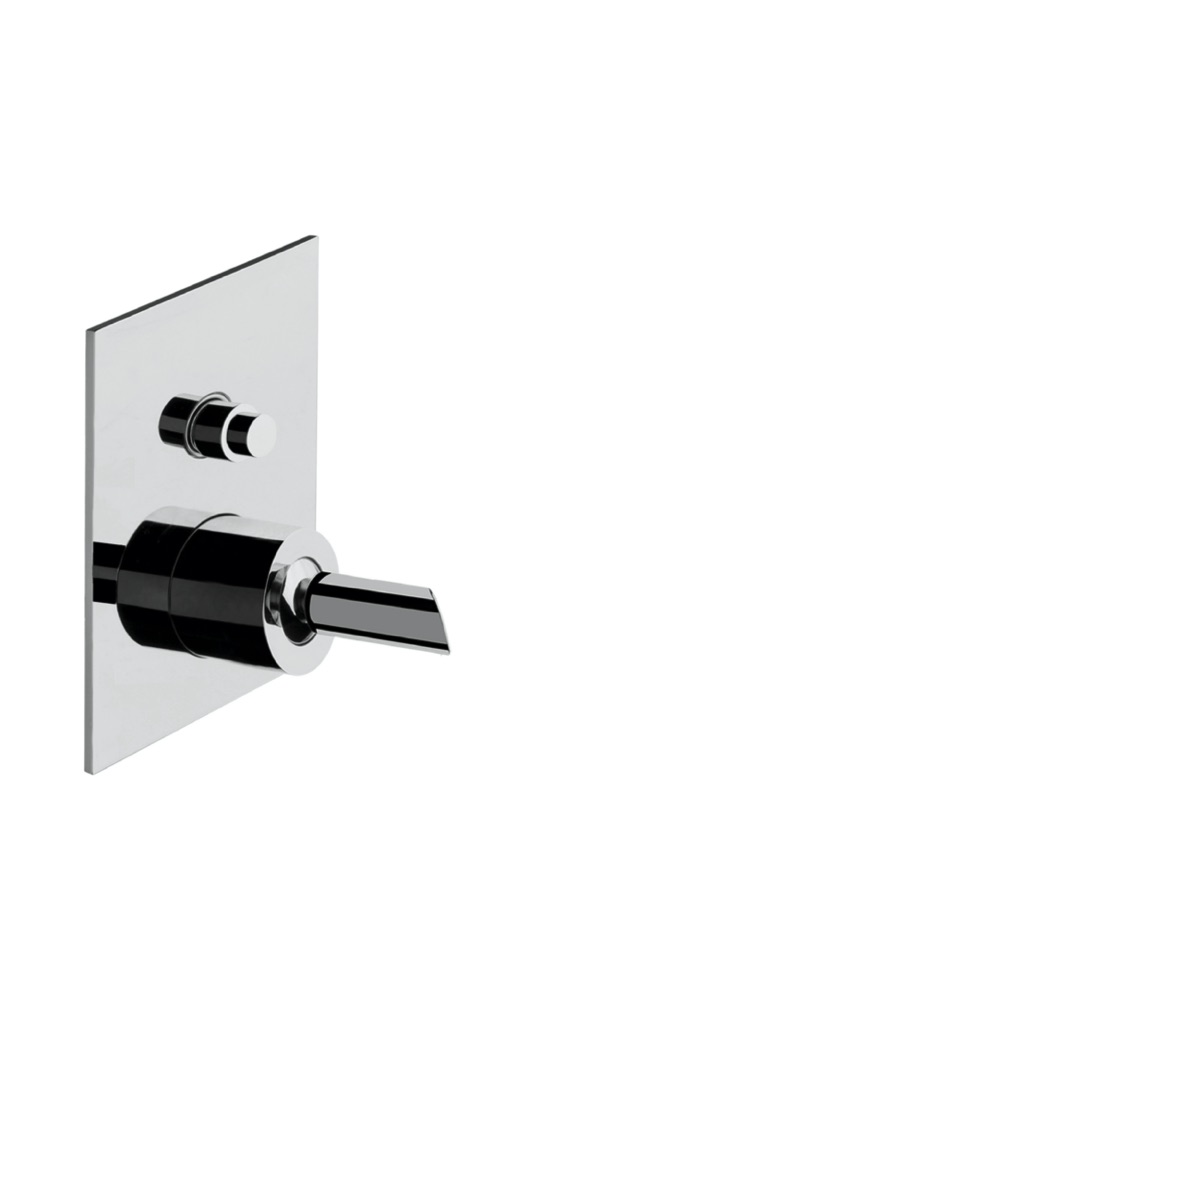 Wall mounted manual mixer with diverter, rectangular plate and ø 18.5 mm handle